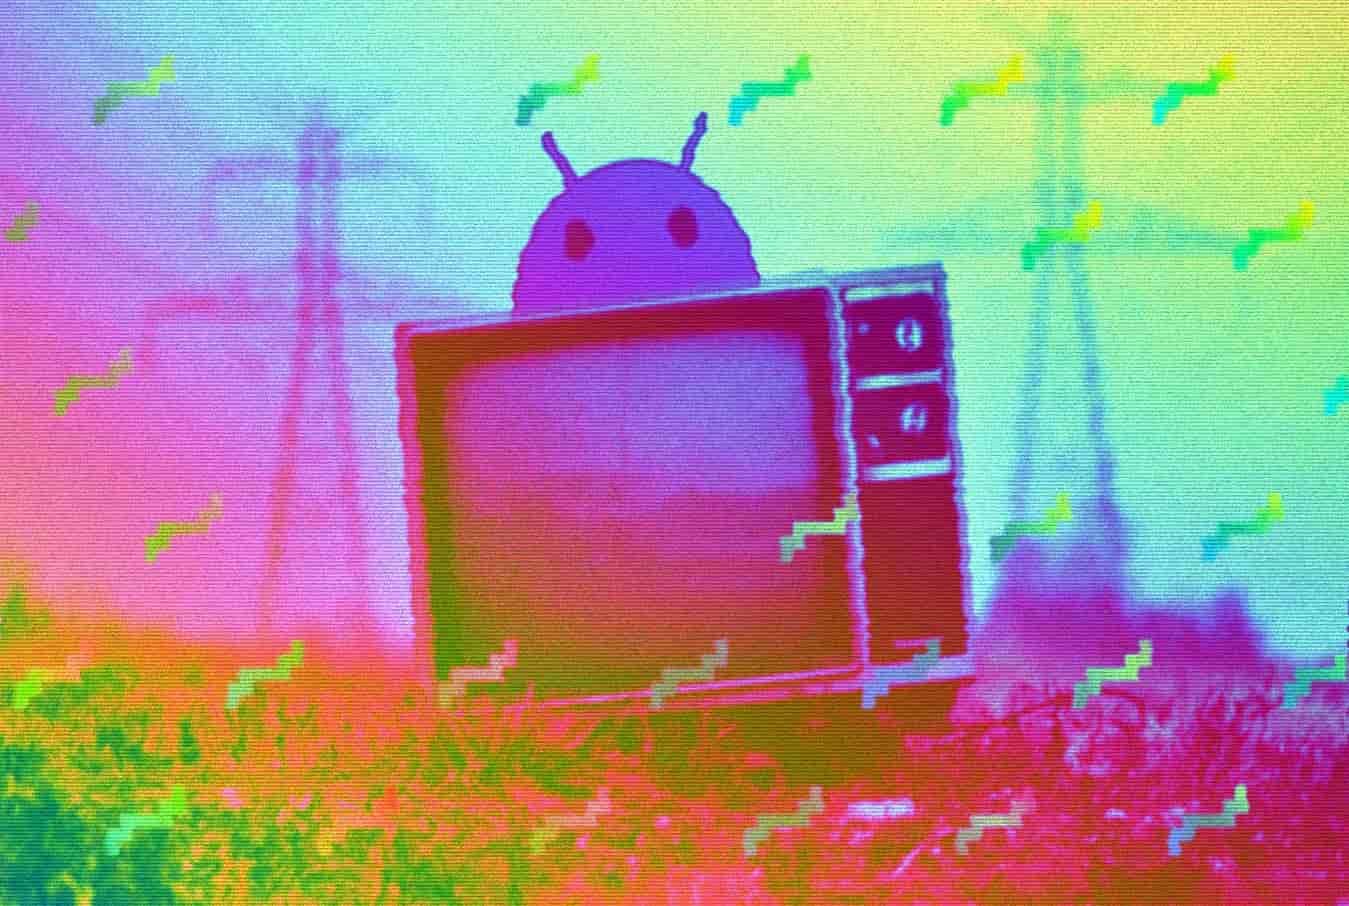 New malware found targeting IoT devices, Android TV globally